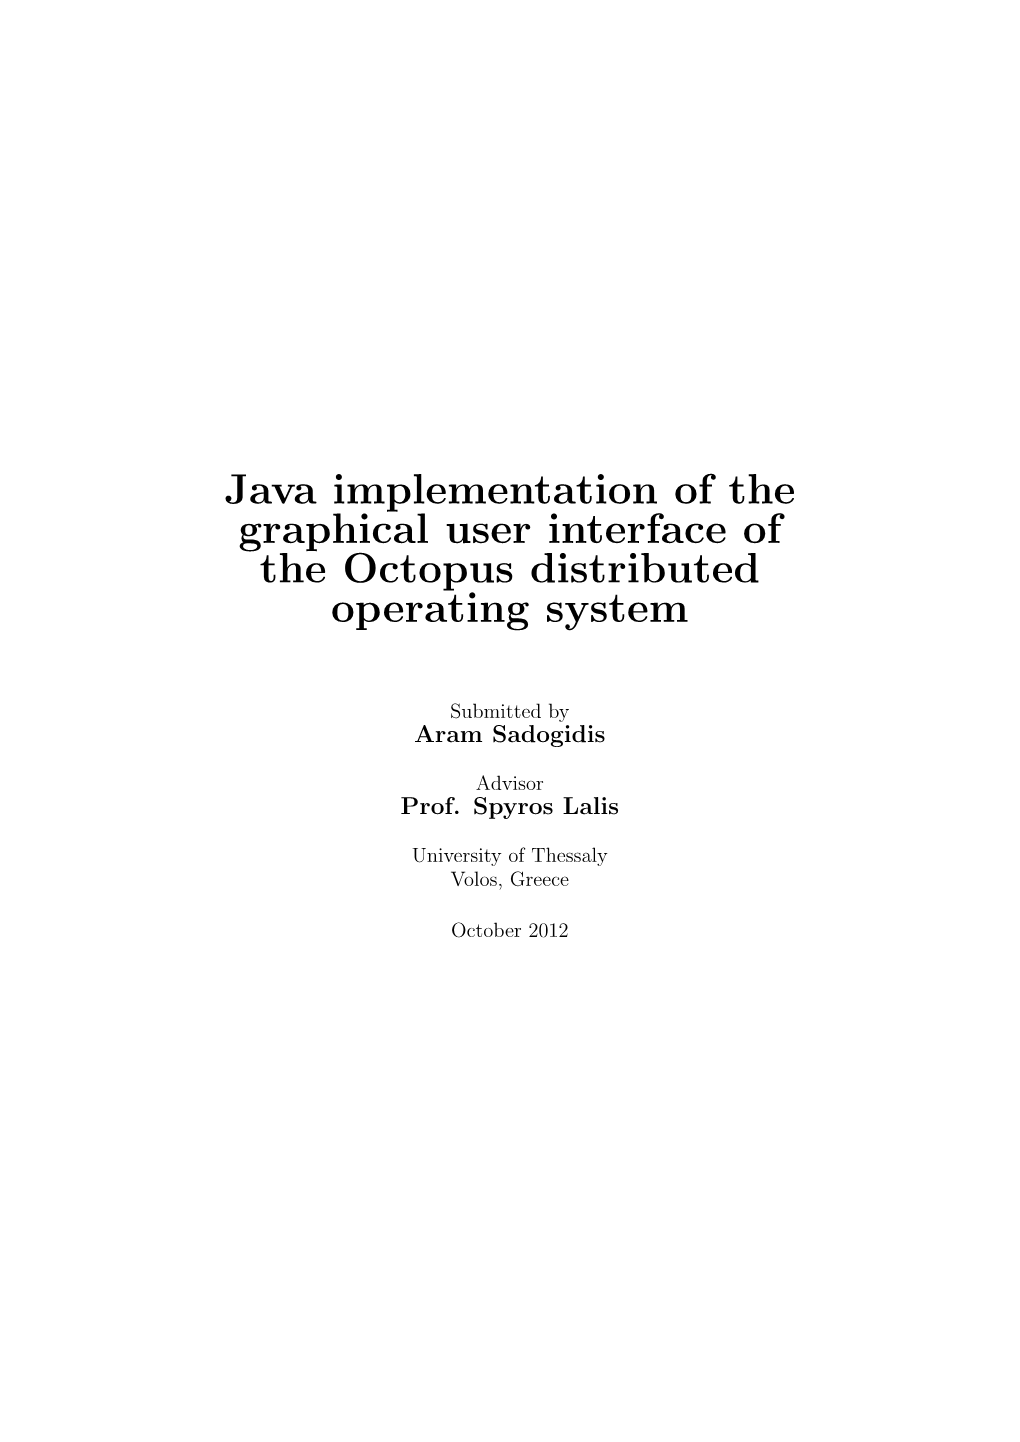 Java Implementation of the Graphical User Interface of the Octopus Distributed Operating System